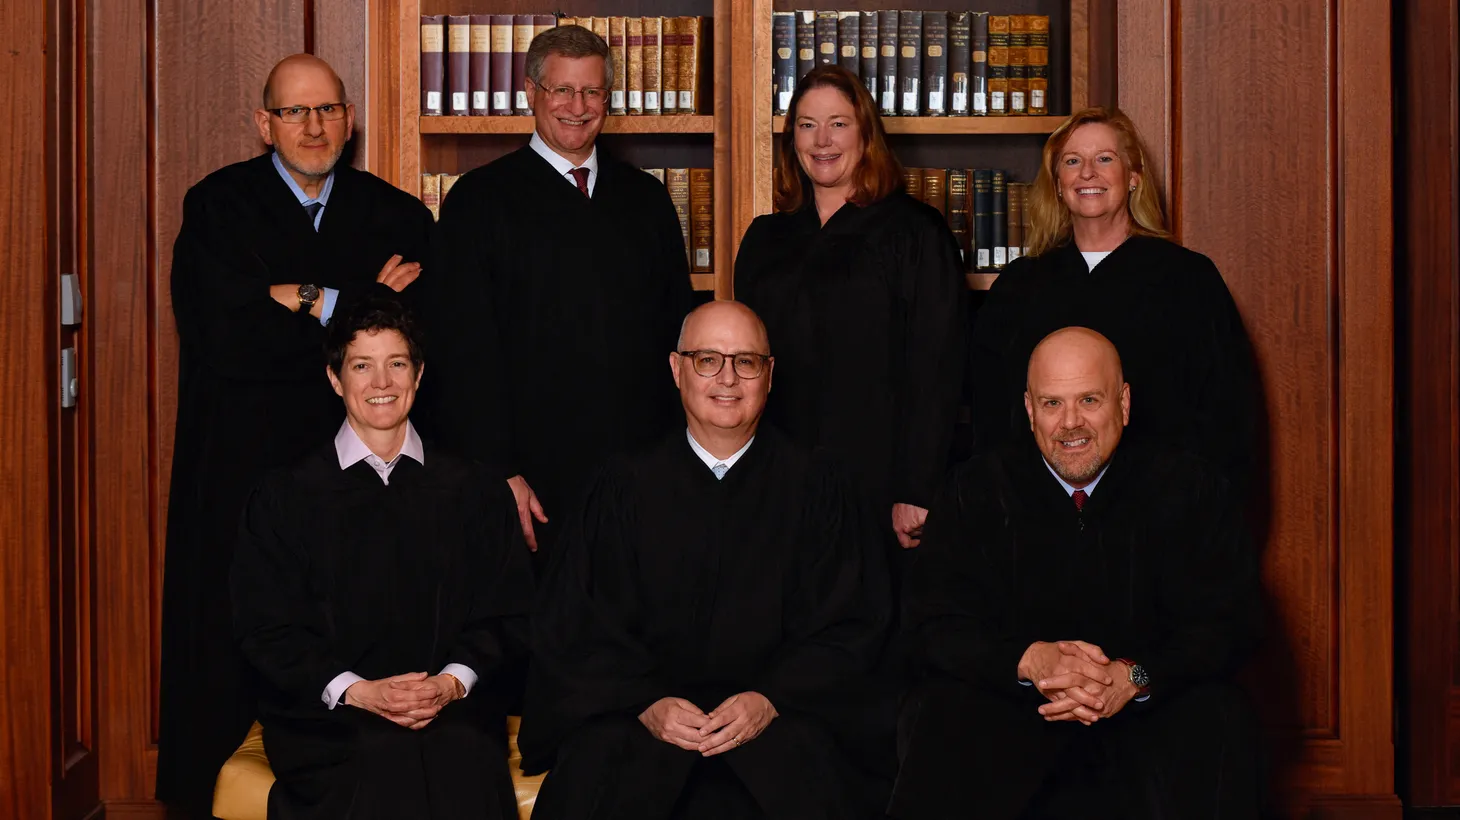 An undated handout photo shows the full Colorado Supreme Court in Denver.